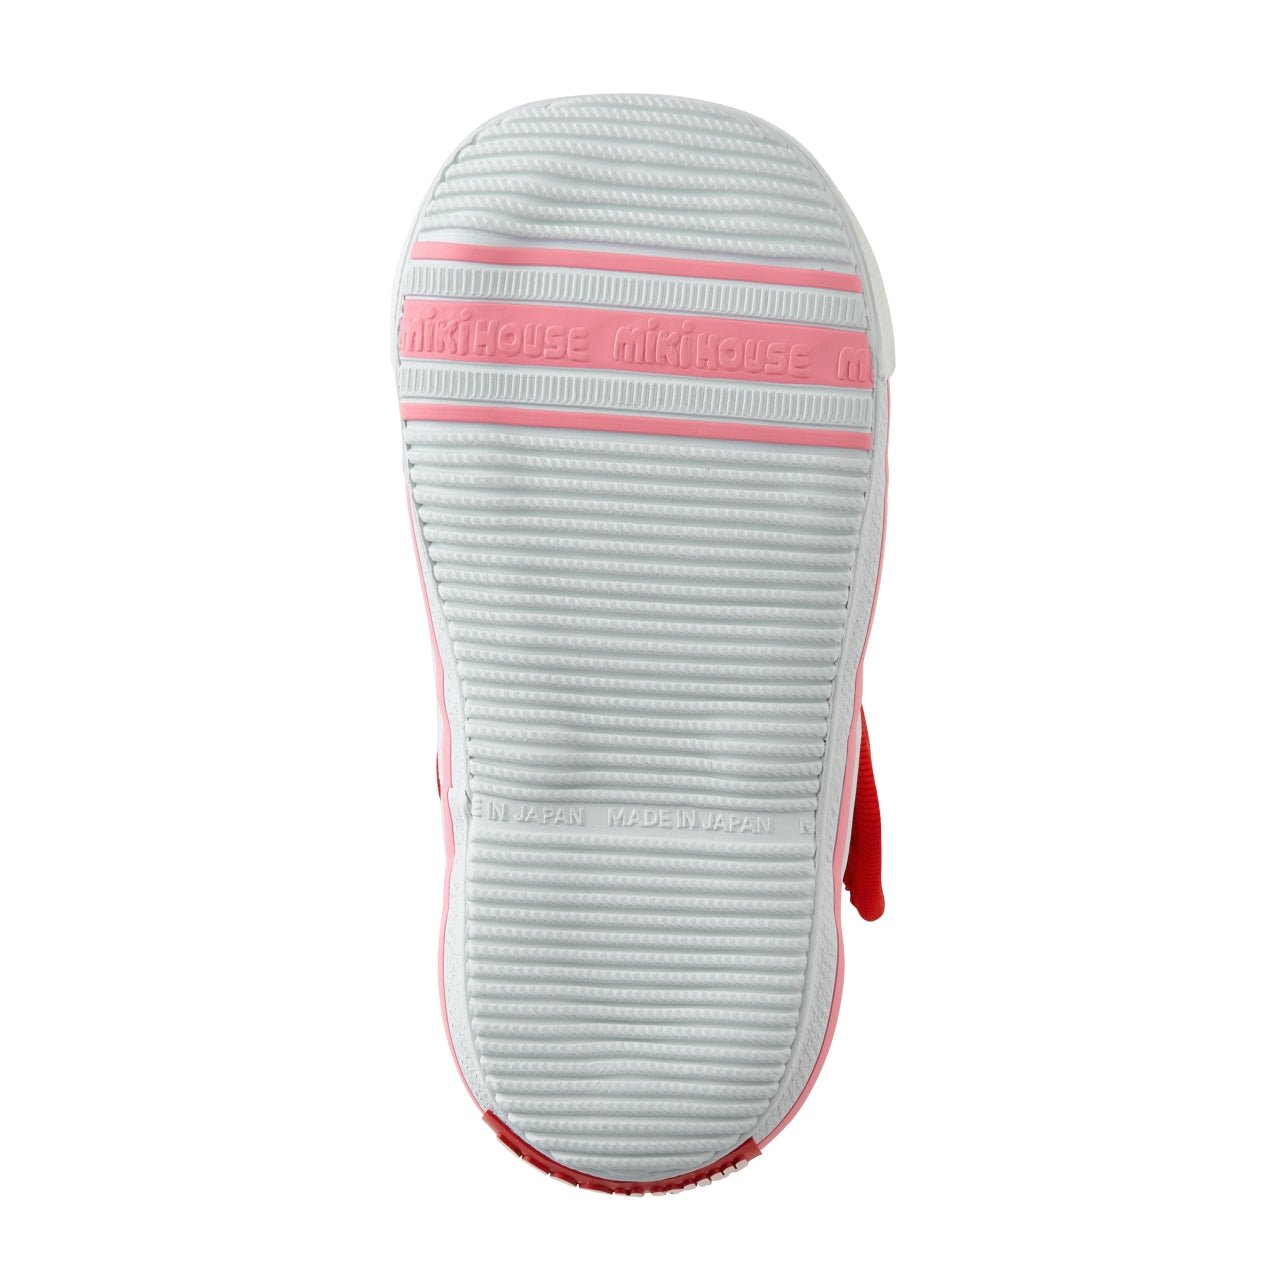 Double Russell Mesh Second Shoes- Cherry Pink - MIKI HOUSE USA